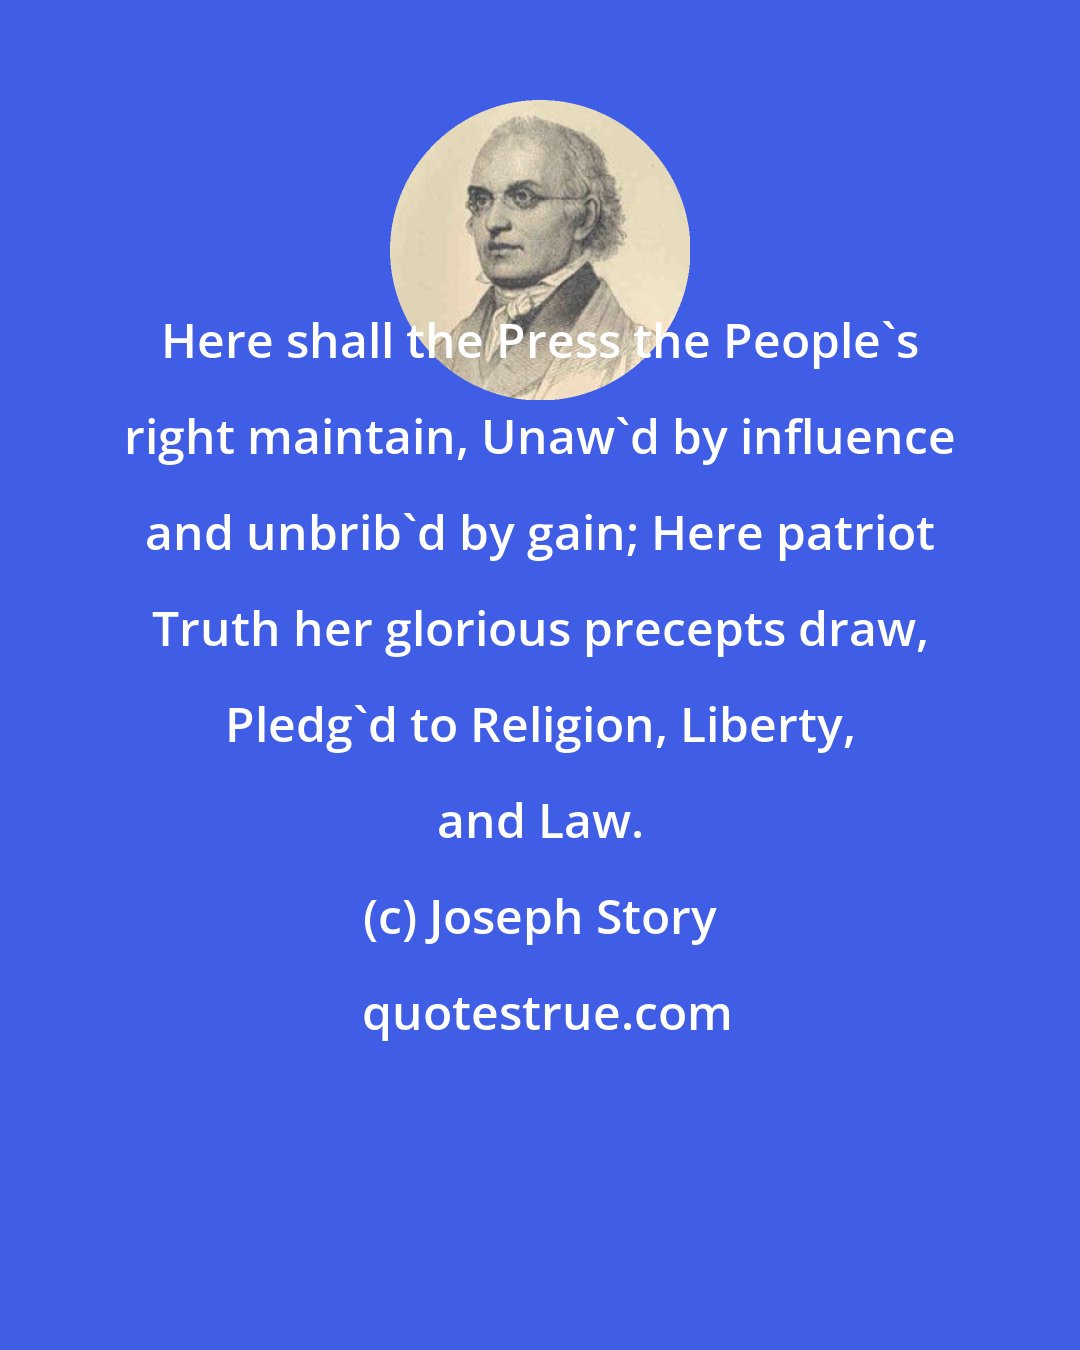 Joseph Story: Here shall the Press the People's right maintain, Unaw'd by influence and unbrib'd by gain; Here patriot Truth her glorious precepts draw, Pledg'd to Religion, Liberty, and Law.